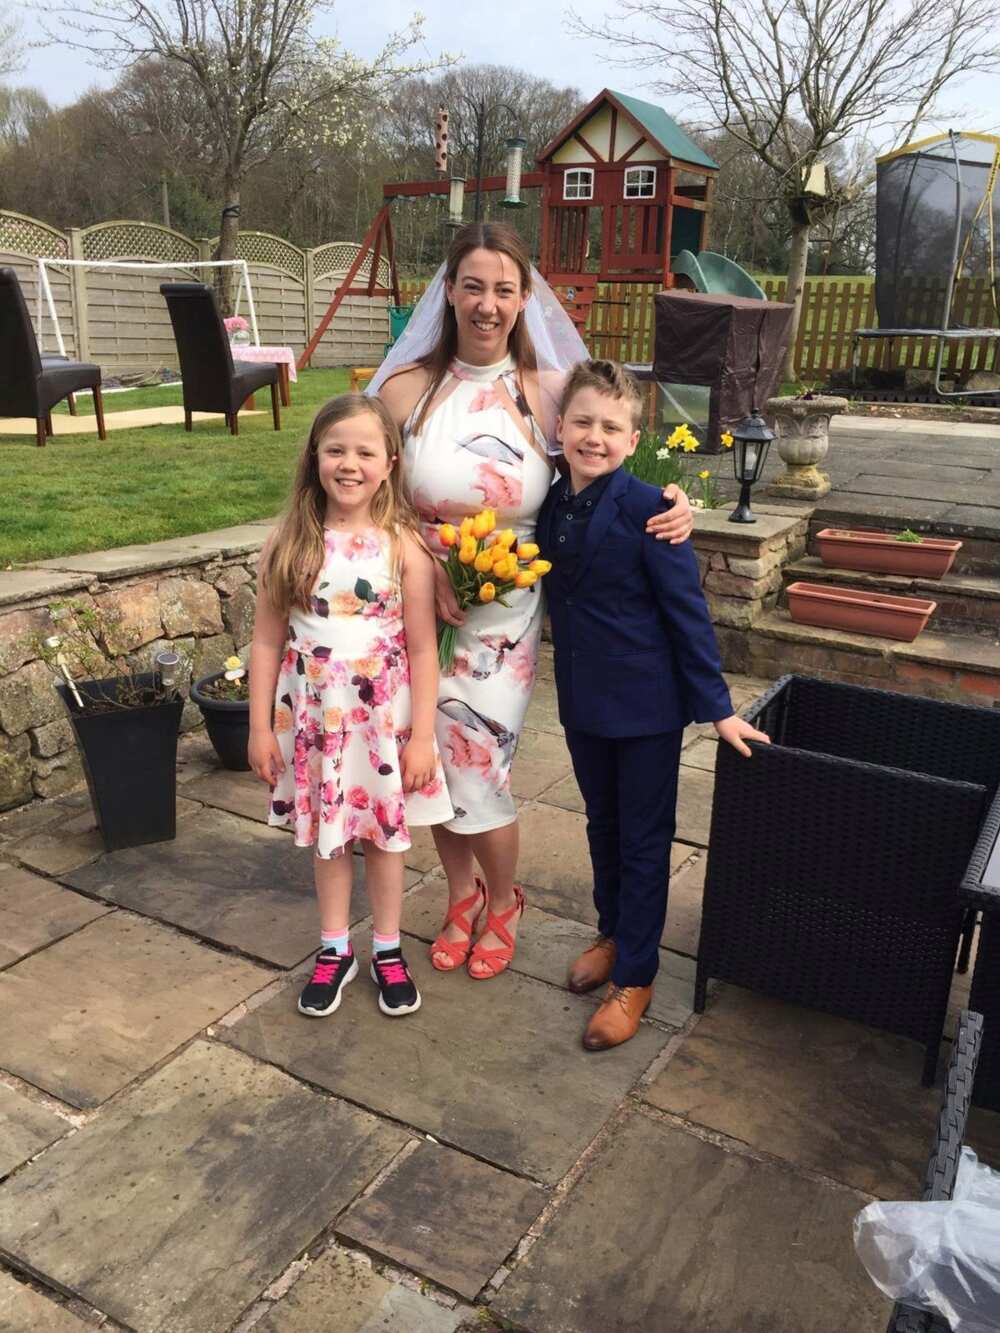 Children surprise their parents with a garden wedding after their big day was cancelled due to COVID-19